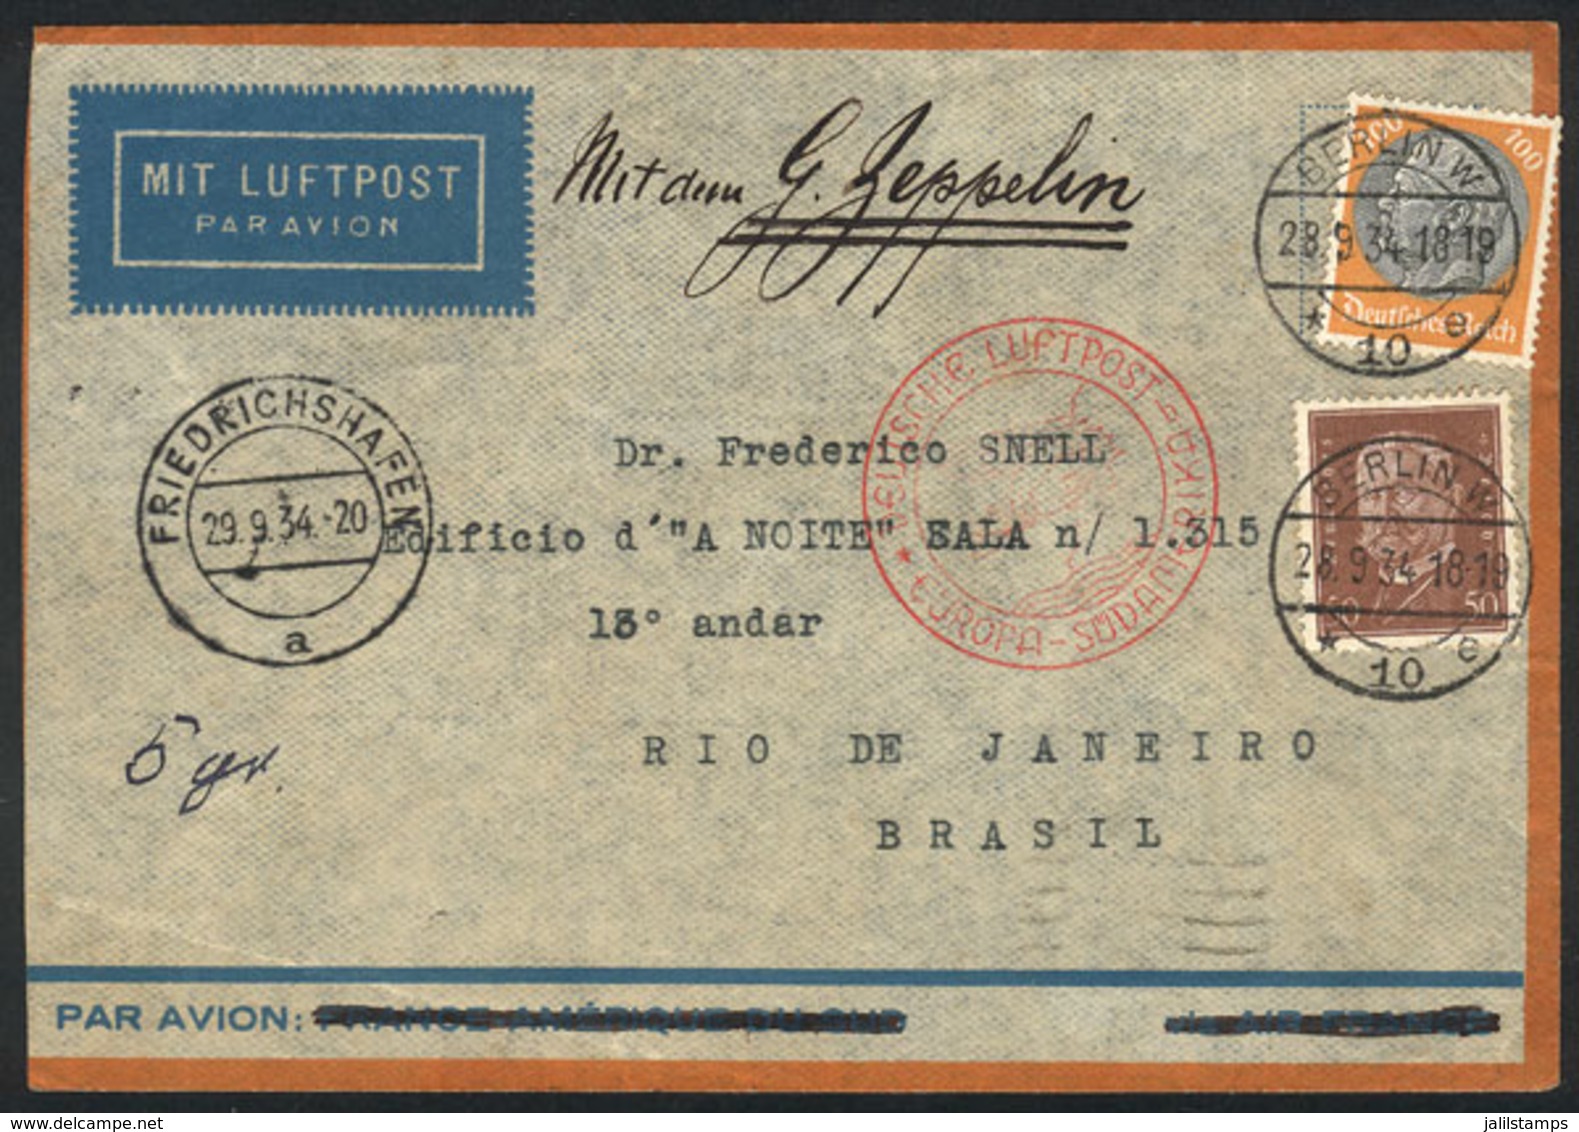 GERMANY: Cover Flown By ZEPPELIN, Sent From Berlin To Rio De Janeiro On 28/SE/1934, With Friedrichshafen Transit Mark Of - Storia Postale